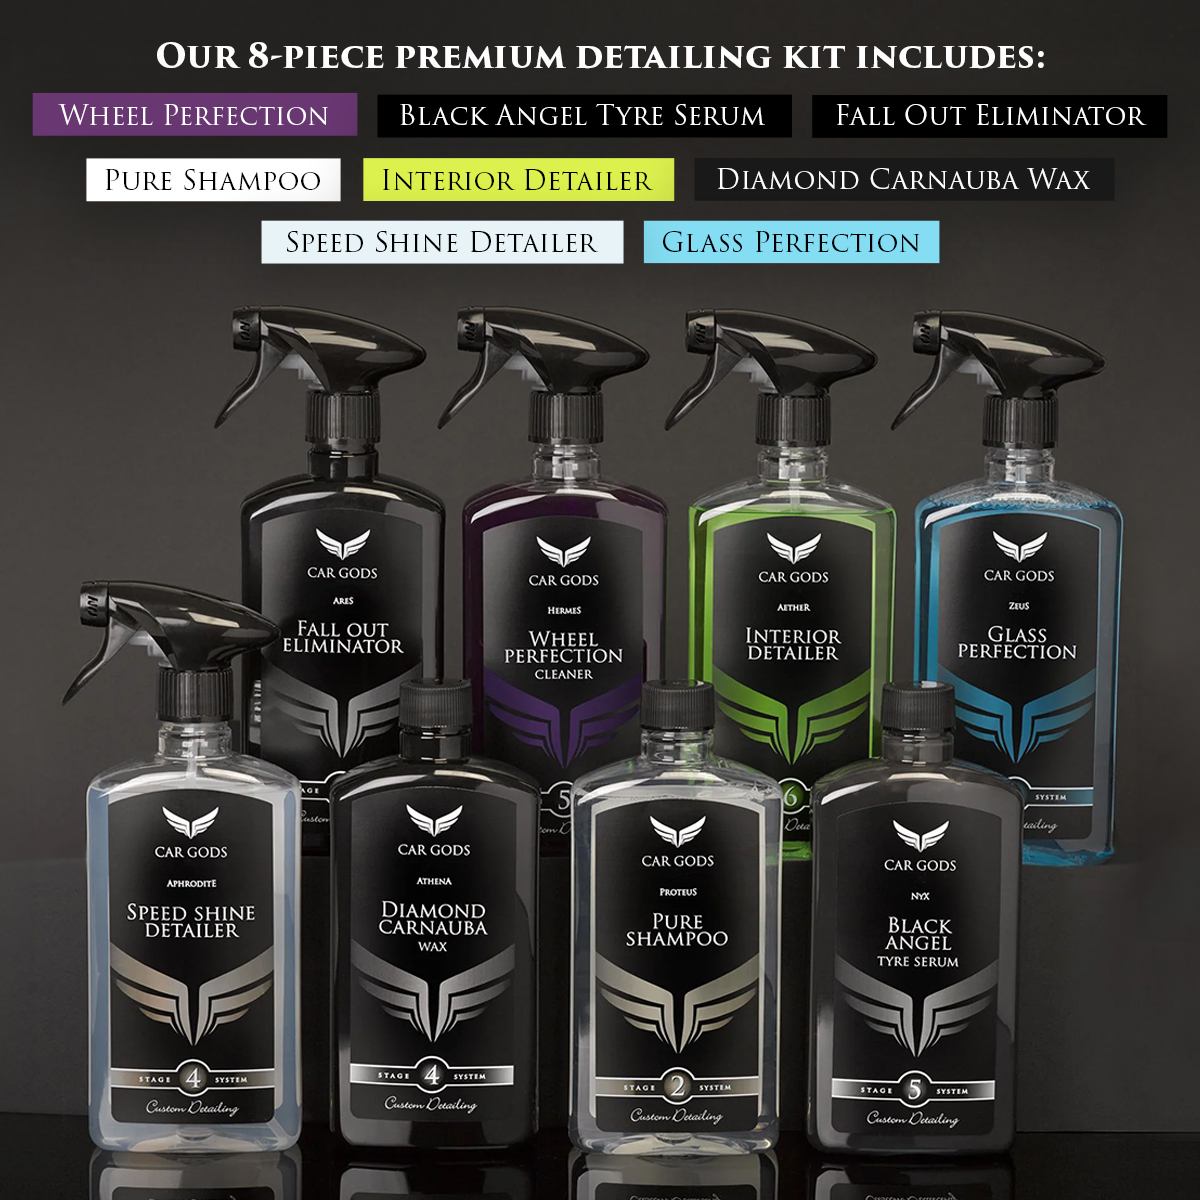 Our 8 piece premium detailing kit includes: Wheel Perfection Cleaner, Black Angel Tyre Serum, Fall Out Eliminator, Pure Shampoo, Interior Detailer, Glass Perfection, Diamond Carnauba Wax, and Speed Shine Detailer, plus a Car Gods detailing bag.